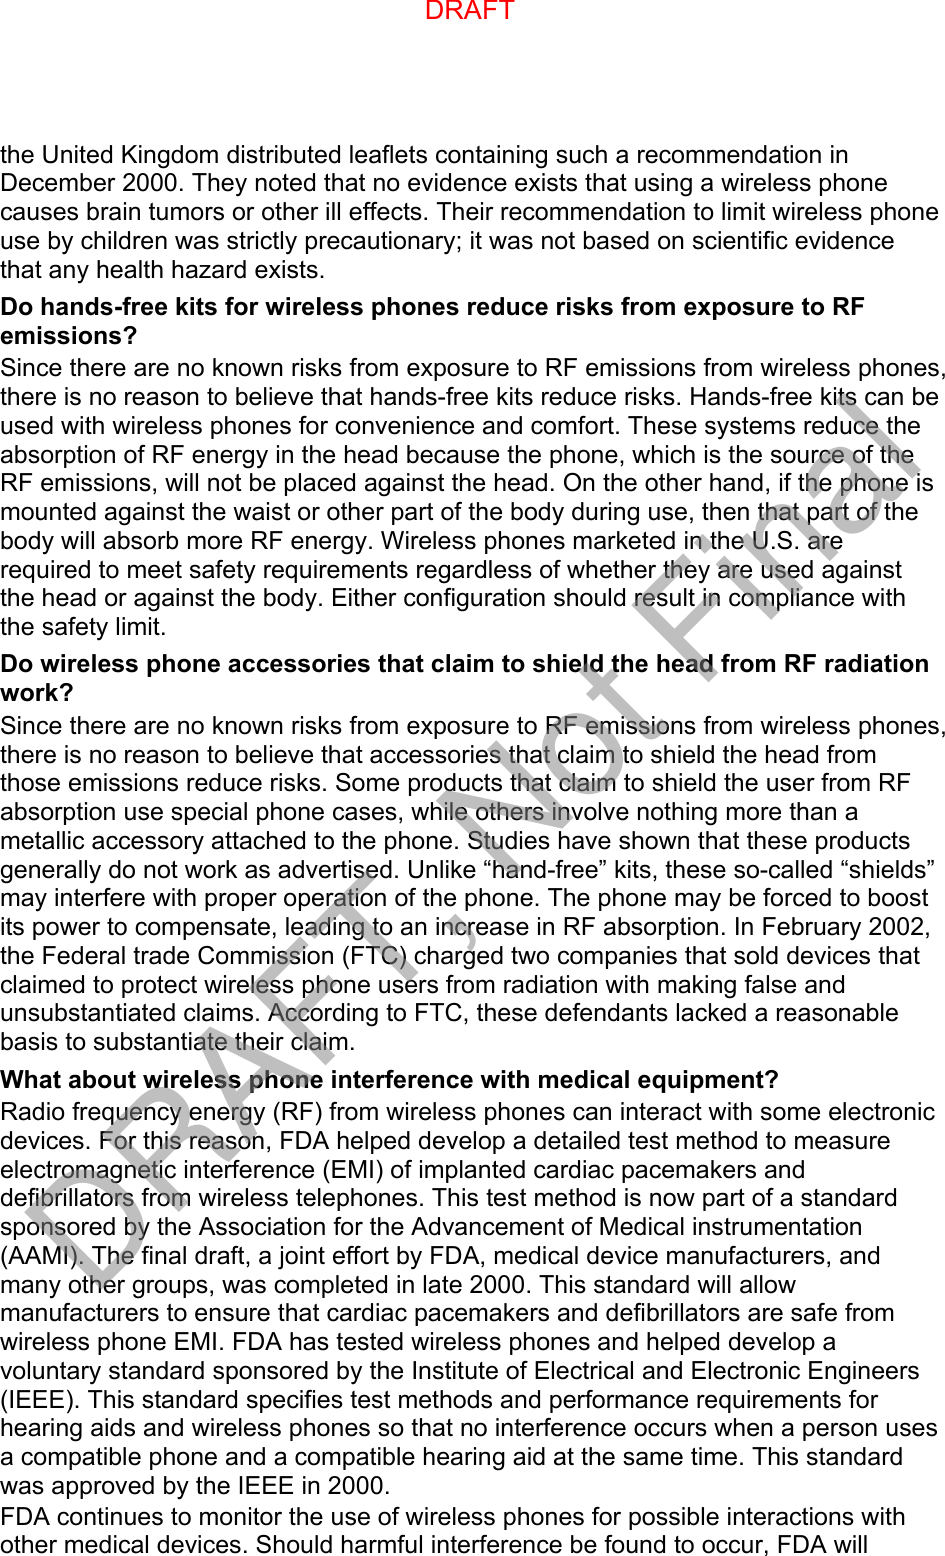 the United Kingdom distributed leaflets containing such a recommendation in December 2000. They noted that no evidence exists that using a wireless phone causes brain tumors or other ill effects. Their recommendation to limit wireless phone use by children was strictly precautionary; it was not based on scientific evidence that any health hazard exists.   Do hands-free kits for wireless phones reduce risks from exposure to RF emissions? Since there are no known risks from exposure to RF emissions from wireless phones, there is no reason to believe that hands-free kits reduce risks. Hands-free kits can be used with wireless phones for convenience and comfort. These systems reduce the absorption of RF energy in the head because the phone, which is the source of the RF emissions, will not be placed against the head. On the other hand, if the phone is mounted against the waist or other part of the body during use, then that part of the body will absorb more RF energy. Wireless phones marketed in the U.S. are required to meet safety requirements regardless of whether they are used against the head or against the body. Either configuration should result in compliance with the safety limit. Do wireless phone accessories that claim to shield the head from RF radiation work? Since there are no known risks from exposure to RF emissions from wireless phones, there is no reason to believe that accessories that claim to shield the head from those emissions reduce risks. Some products that claim to shield the user from RF absorption use special phone cases, while others involve nothing more than a metallic accessory attached to the phone. Studies have shown that these products generally do not work as advertised. Unlike “hand-free” kits, these so-called “shields” may interfere with proper operation of the phone. The phone may be forced to boost its power to compensate, leading to an increase in RF absorption. In February 2002, the Federal trade Commission (FTC) charged two companies that sold devices that claimed to protect wireless phone users from radiation with making false and unsubstantiated claims. According to FTC, these defendants lacked a reasonable basis to substantiate their claim. What about wireless phone interference with medical equipment? Radio frequency energy (RF) from wireless phones can interact with some electronic devices. For this reason, FDA helped develop a detailed test method to measure electromagnetic interference (EMI) of implanted cardiac pacemakers and defibrillators from wireless telephones. This test method is now part of a standard sponsored by the Association for the Advancement of Medical instrumentation (AAMI). The final draft, a joint effort by FDA, medical device manufacturers, and many other groups, was completed in late 2000. This standard will allow manufacturers to ensure that cardiac pacemakers and defibrillators are safe from wireless phone EMI. FDA has tested wireless phones and helped develop a voluntary standard sponsored by the Institute of Electrical and Electronic Engineers (IEEE). This standard specifies test methods and performance requirements for hearing aids and wireless phones so that no interference occurs when a person uses a compatible phone and a compatible hearing aid at the same time. This standard was approved by the IEEE in 2000. FDA continues to monitor the use of wireless phones for possible interactions with other medical devices. Should harmful interference be found to occur, FDA will DRAFTDRAFT, Not Final